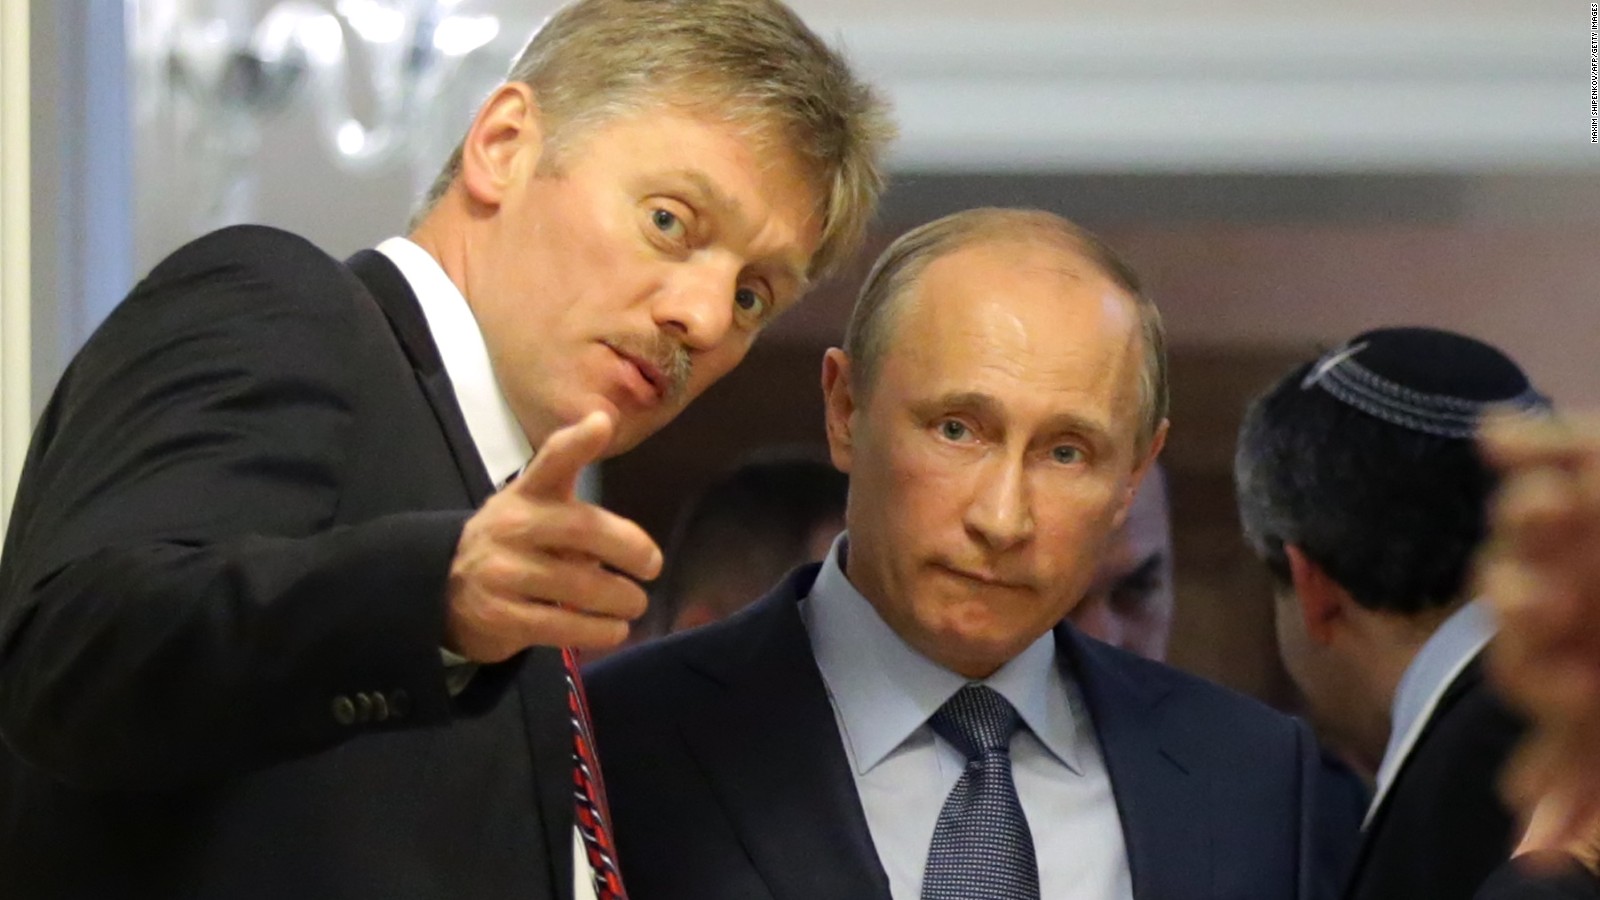 Dmitry Peskov, Putin spokesman refuses to rule out use of nuclear weapons if Russia faced an 'existential threat' - CNN